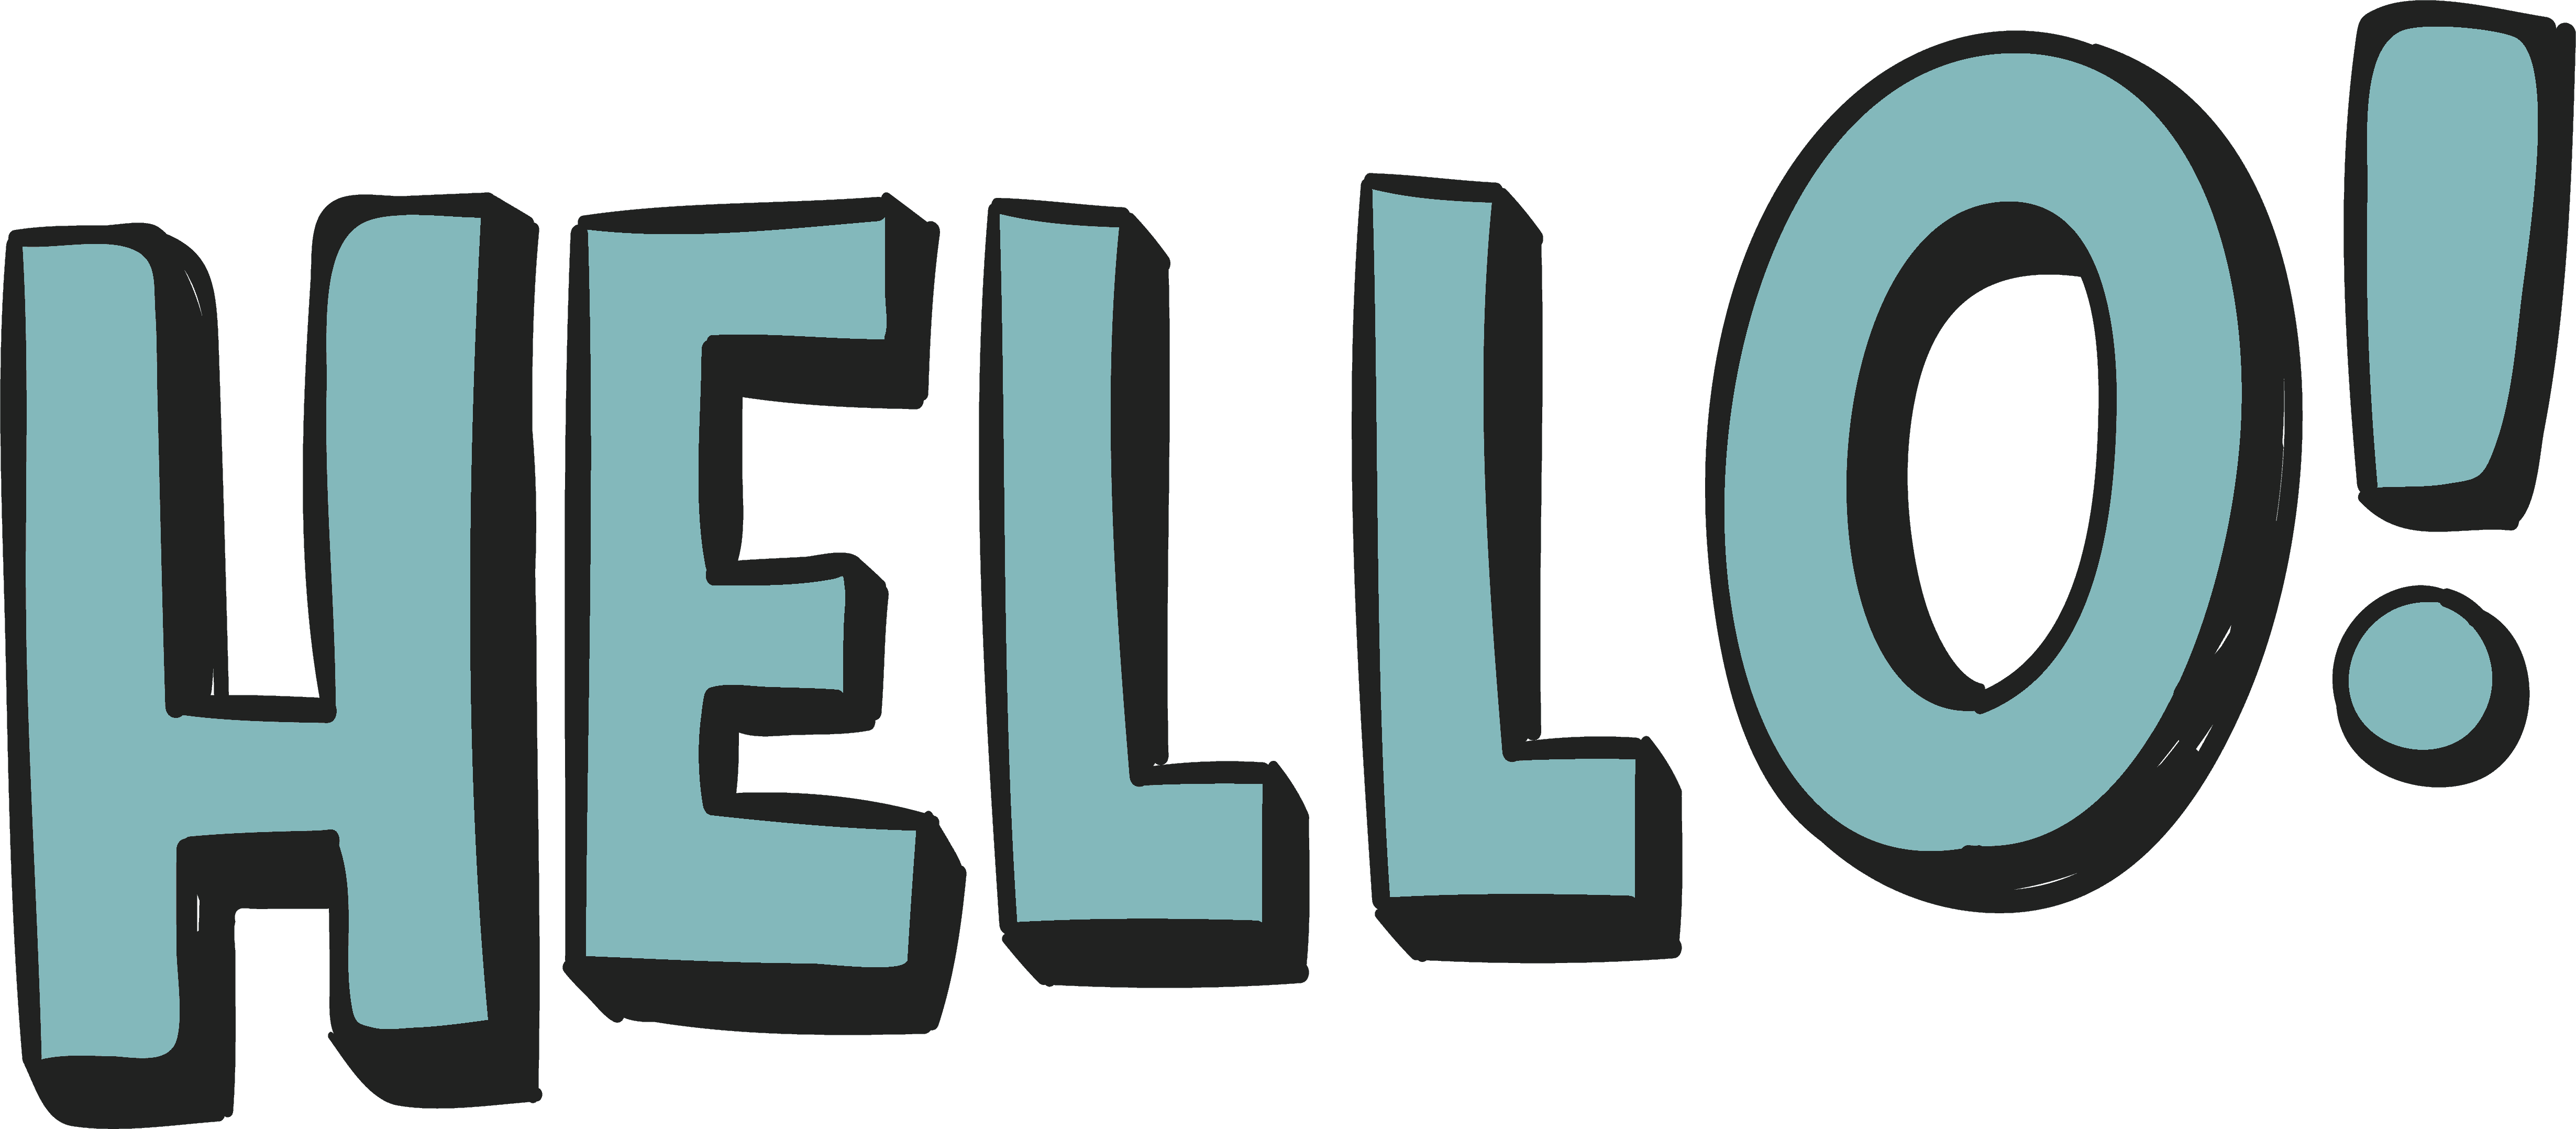 Hello - Hello And Welcome (4919x2156)